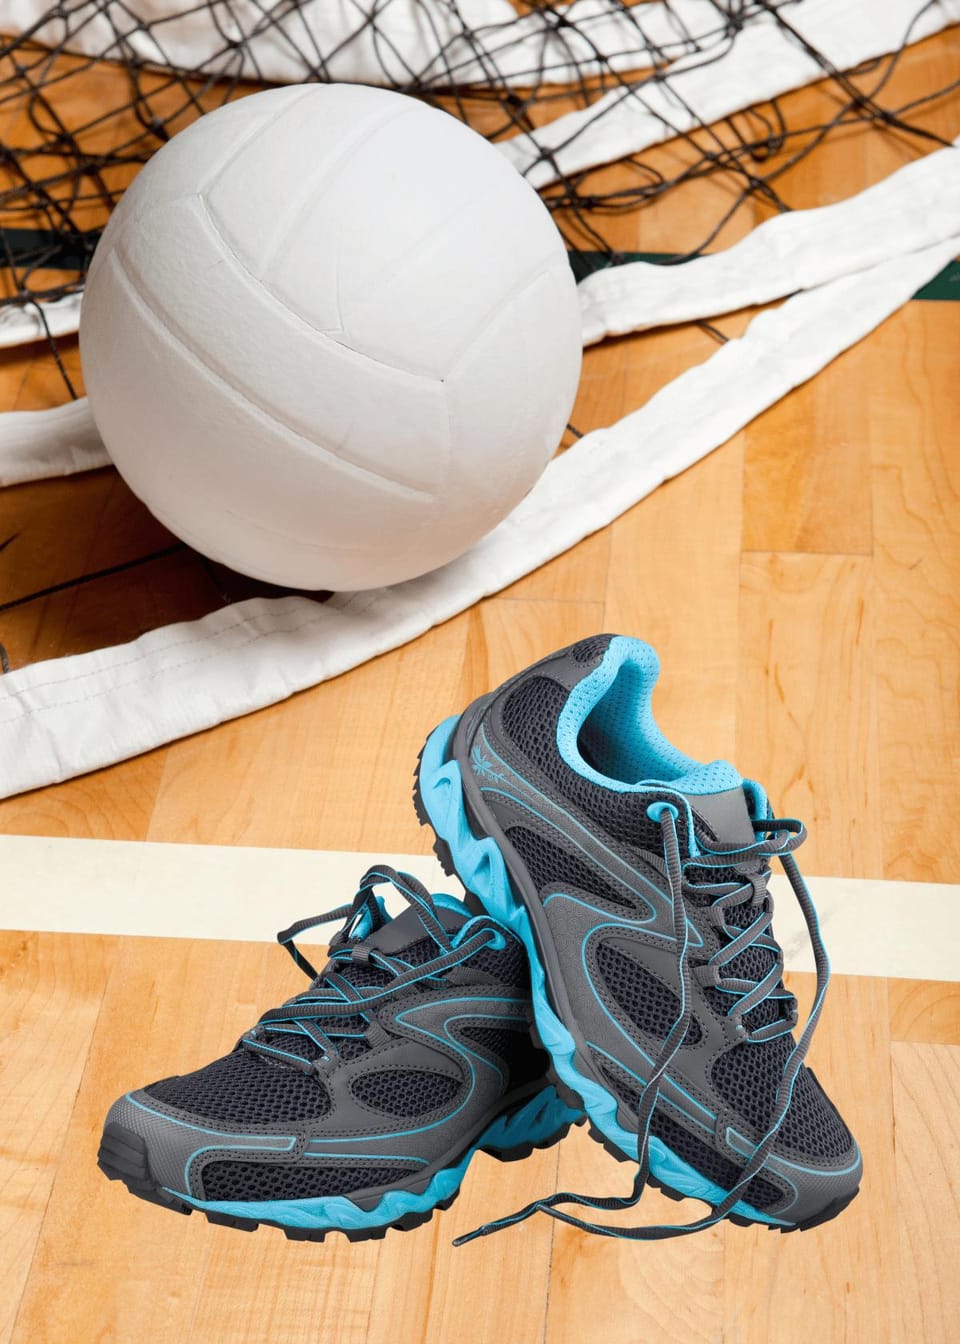 Best Volleyball Shoes for Women